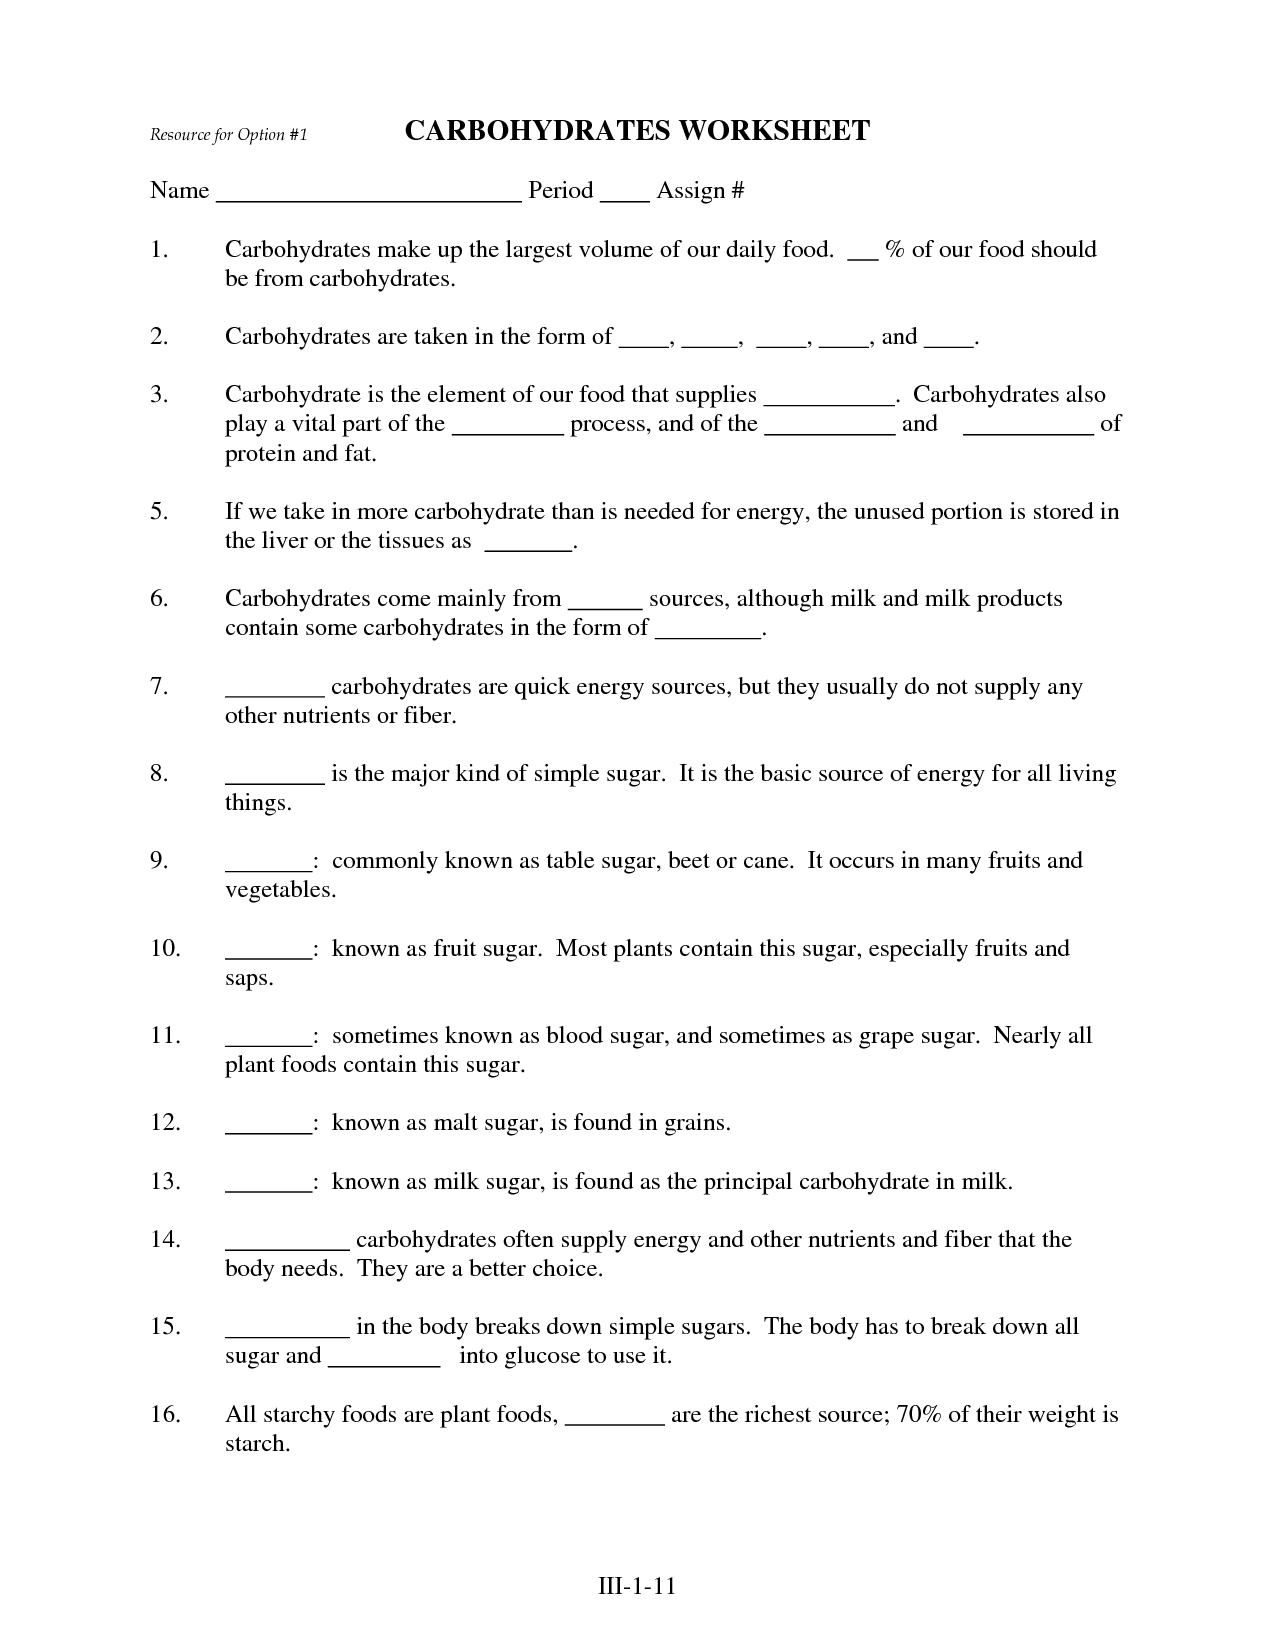 Carbohydrate Worksheet and Answers Image